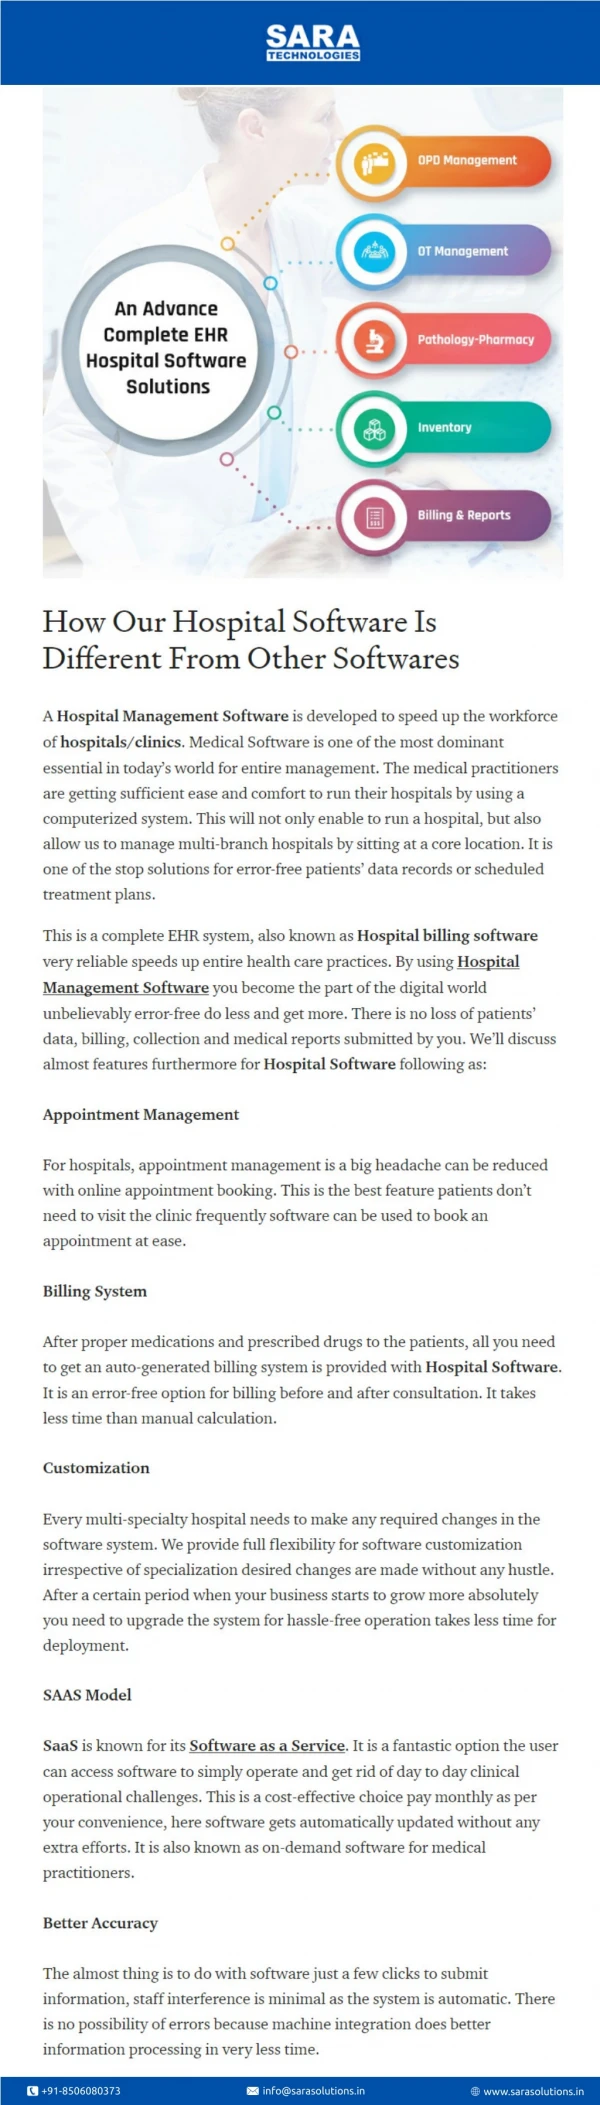 How Our Hospital Software Is Different From Other Softwares